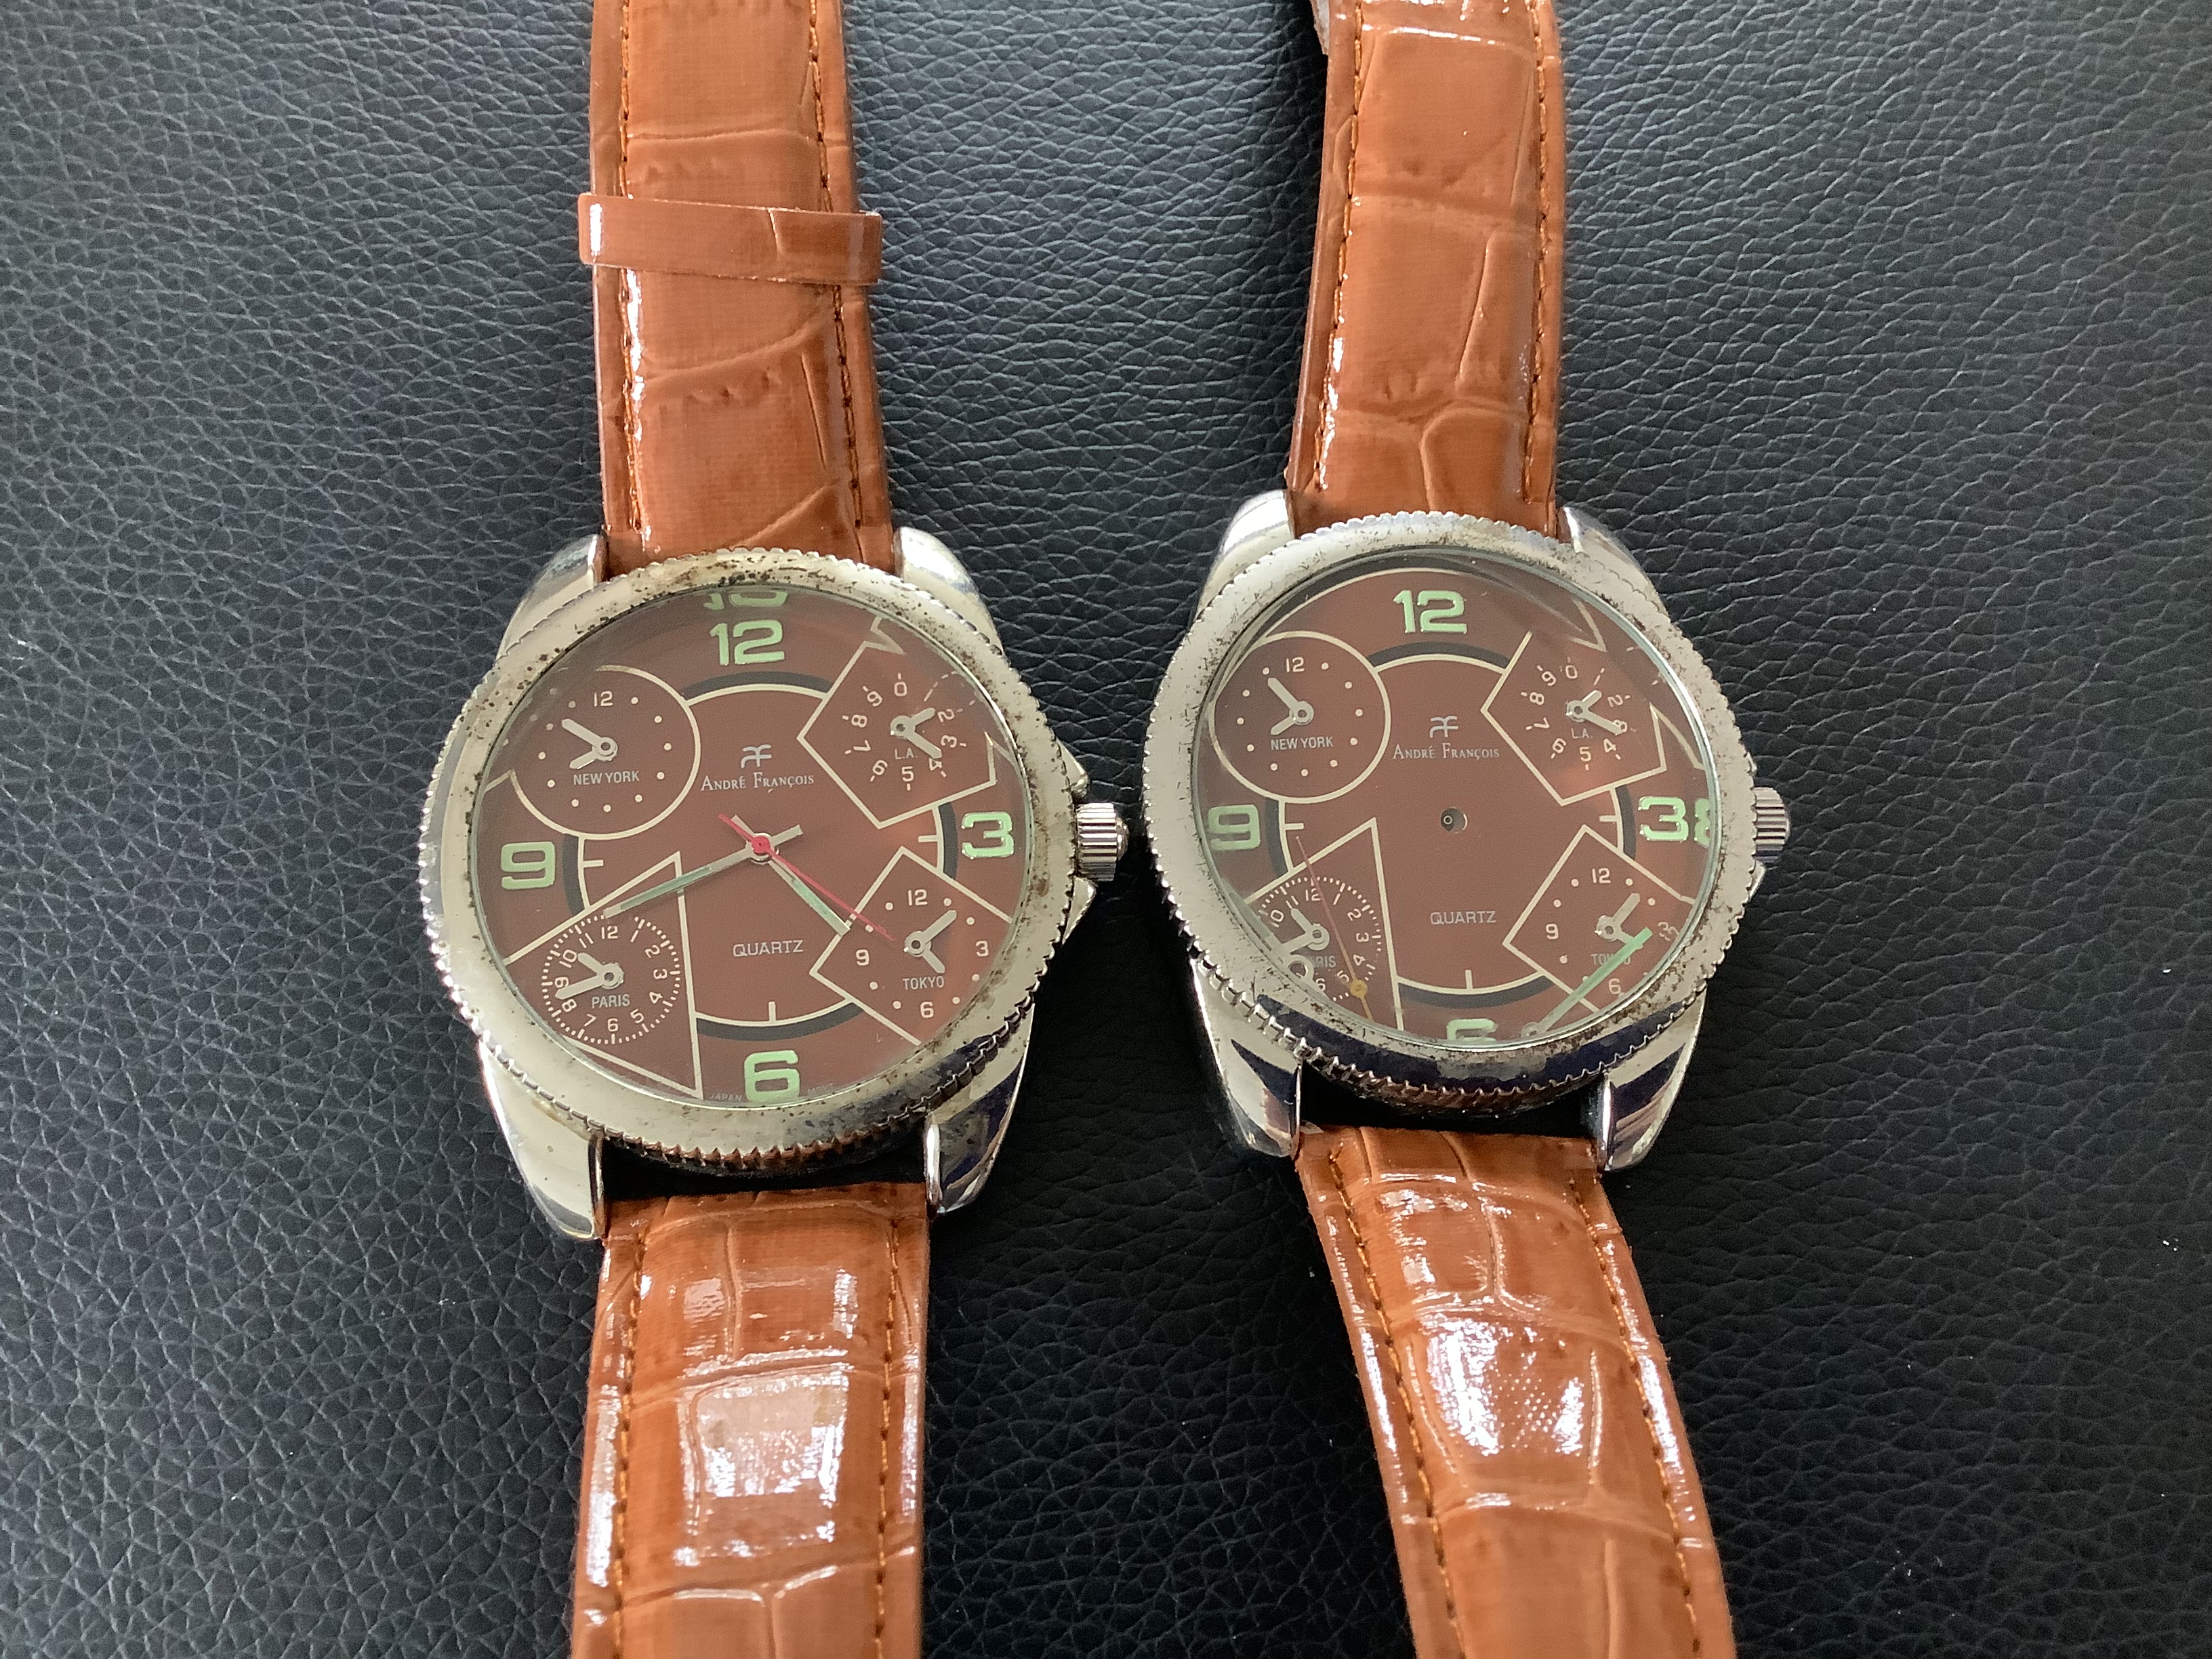 A Pair of Andre Francois Wristwatches (GS 160) Here are 2 Andre Francois Wristwatches. They